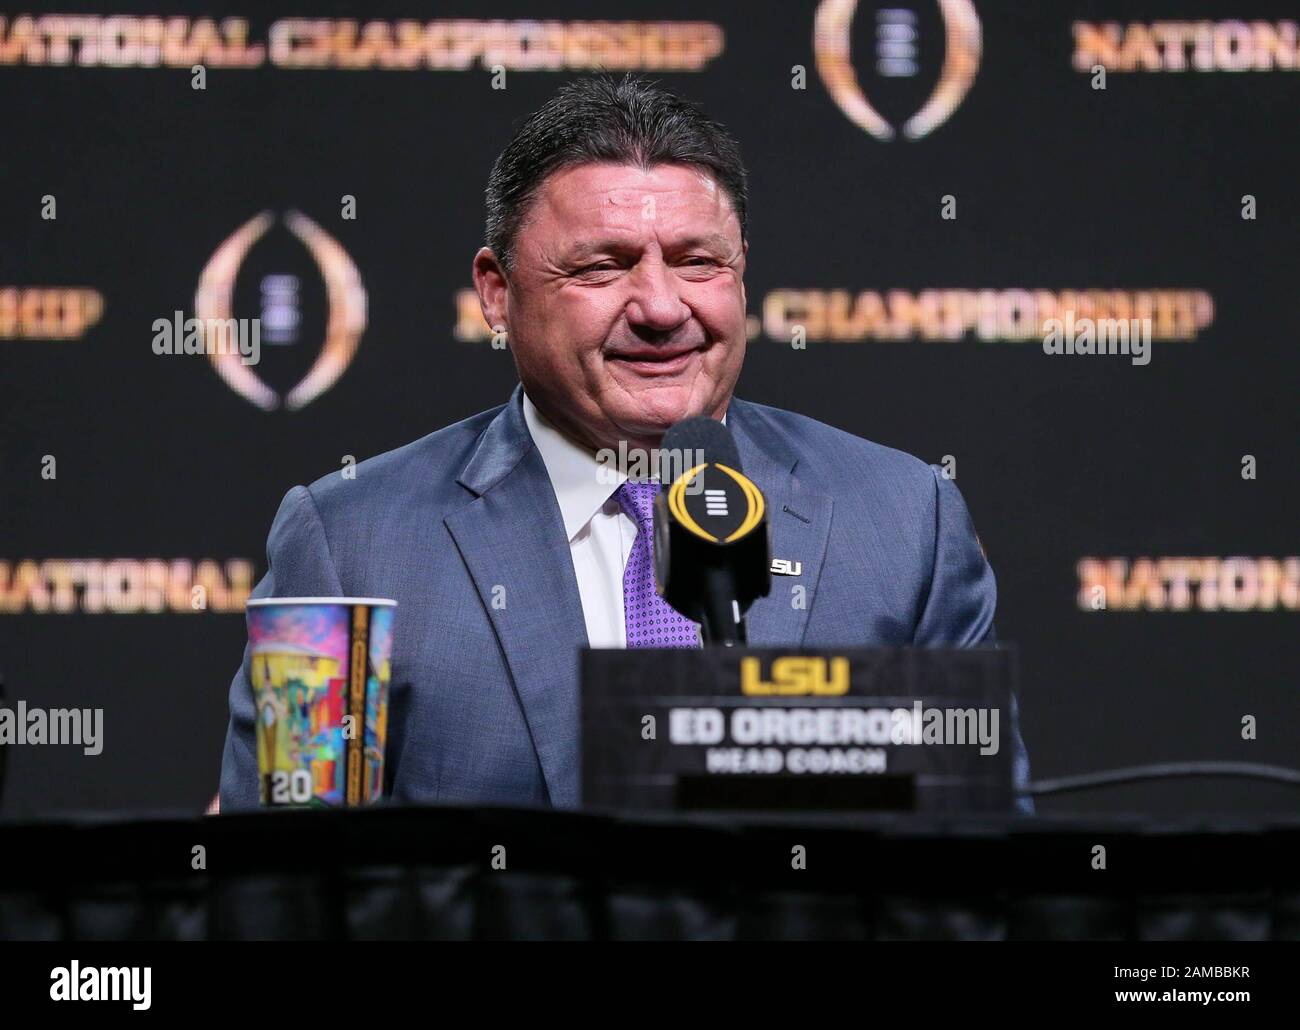 New Orleans, LA, USA. 12th Jan, 2020. LSU Head Coach Ed Orgeron talks with the media during the Head Coaches Press Conference before the College Football National Championship between the Clemson Tigers and the LSU Tigers at the Sheraton Hotel in New Orleans, LA. Jonathan Mailhes/CSM/Alamy Live News Stock Photo